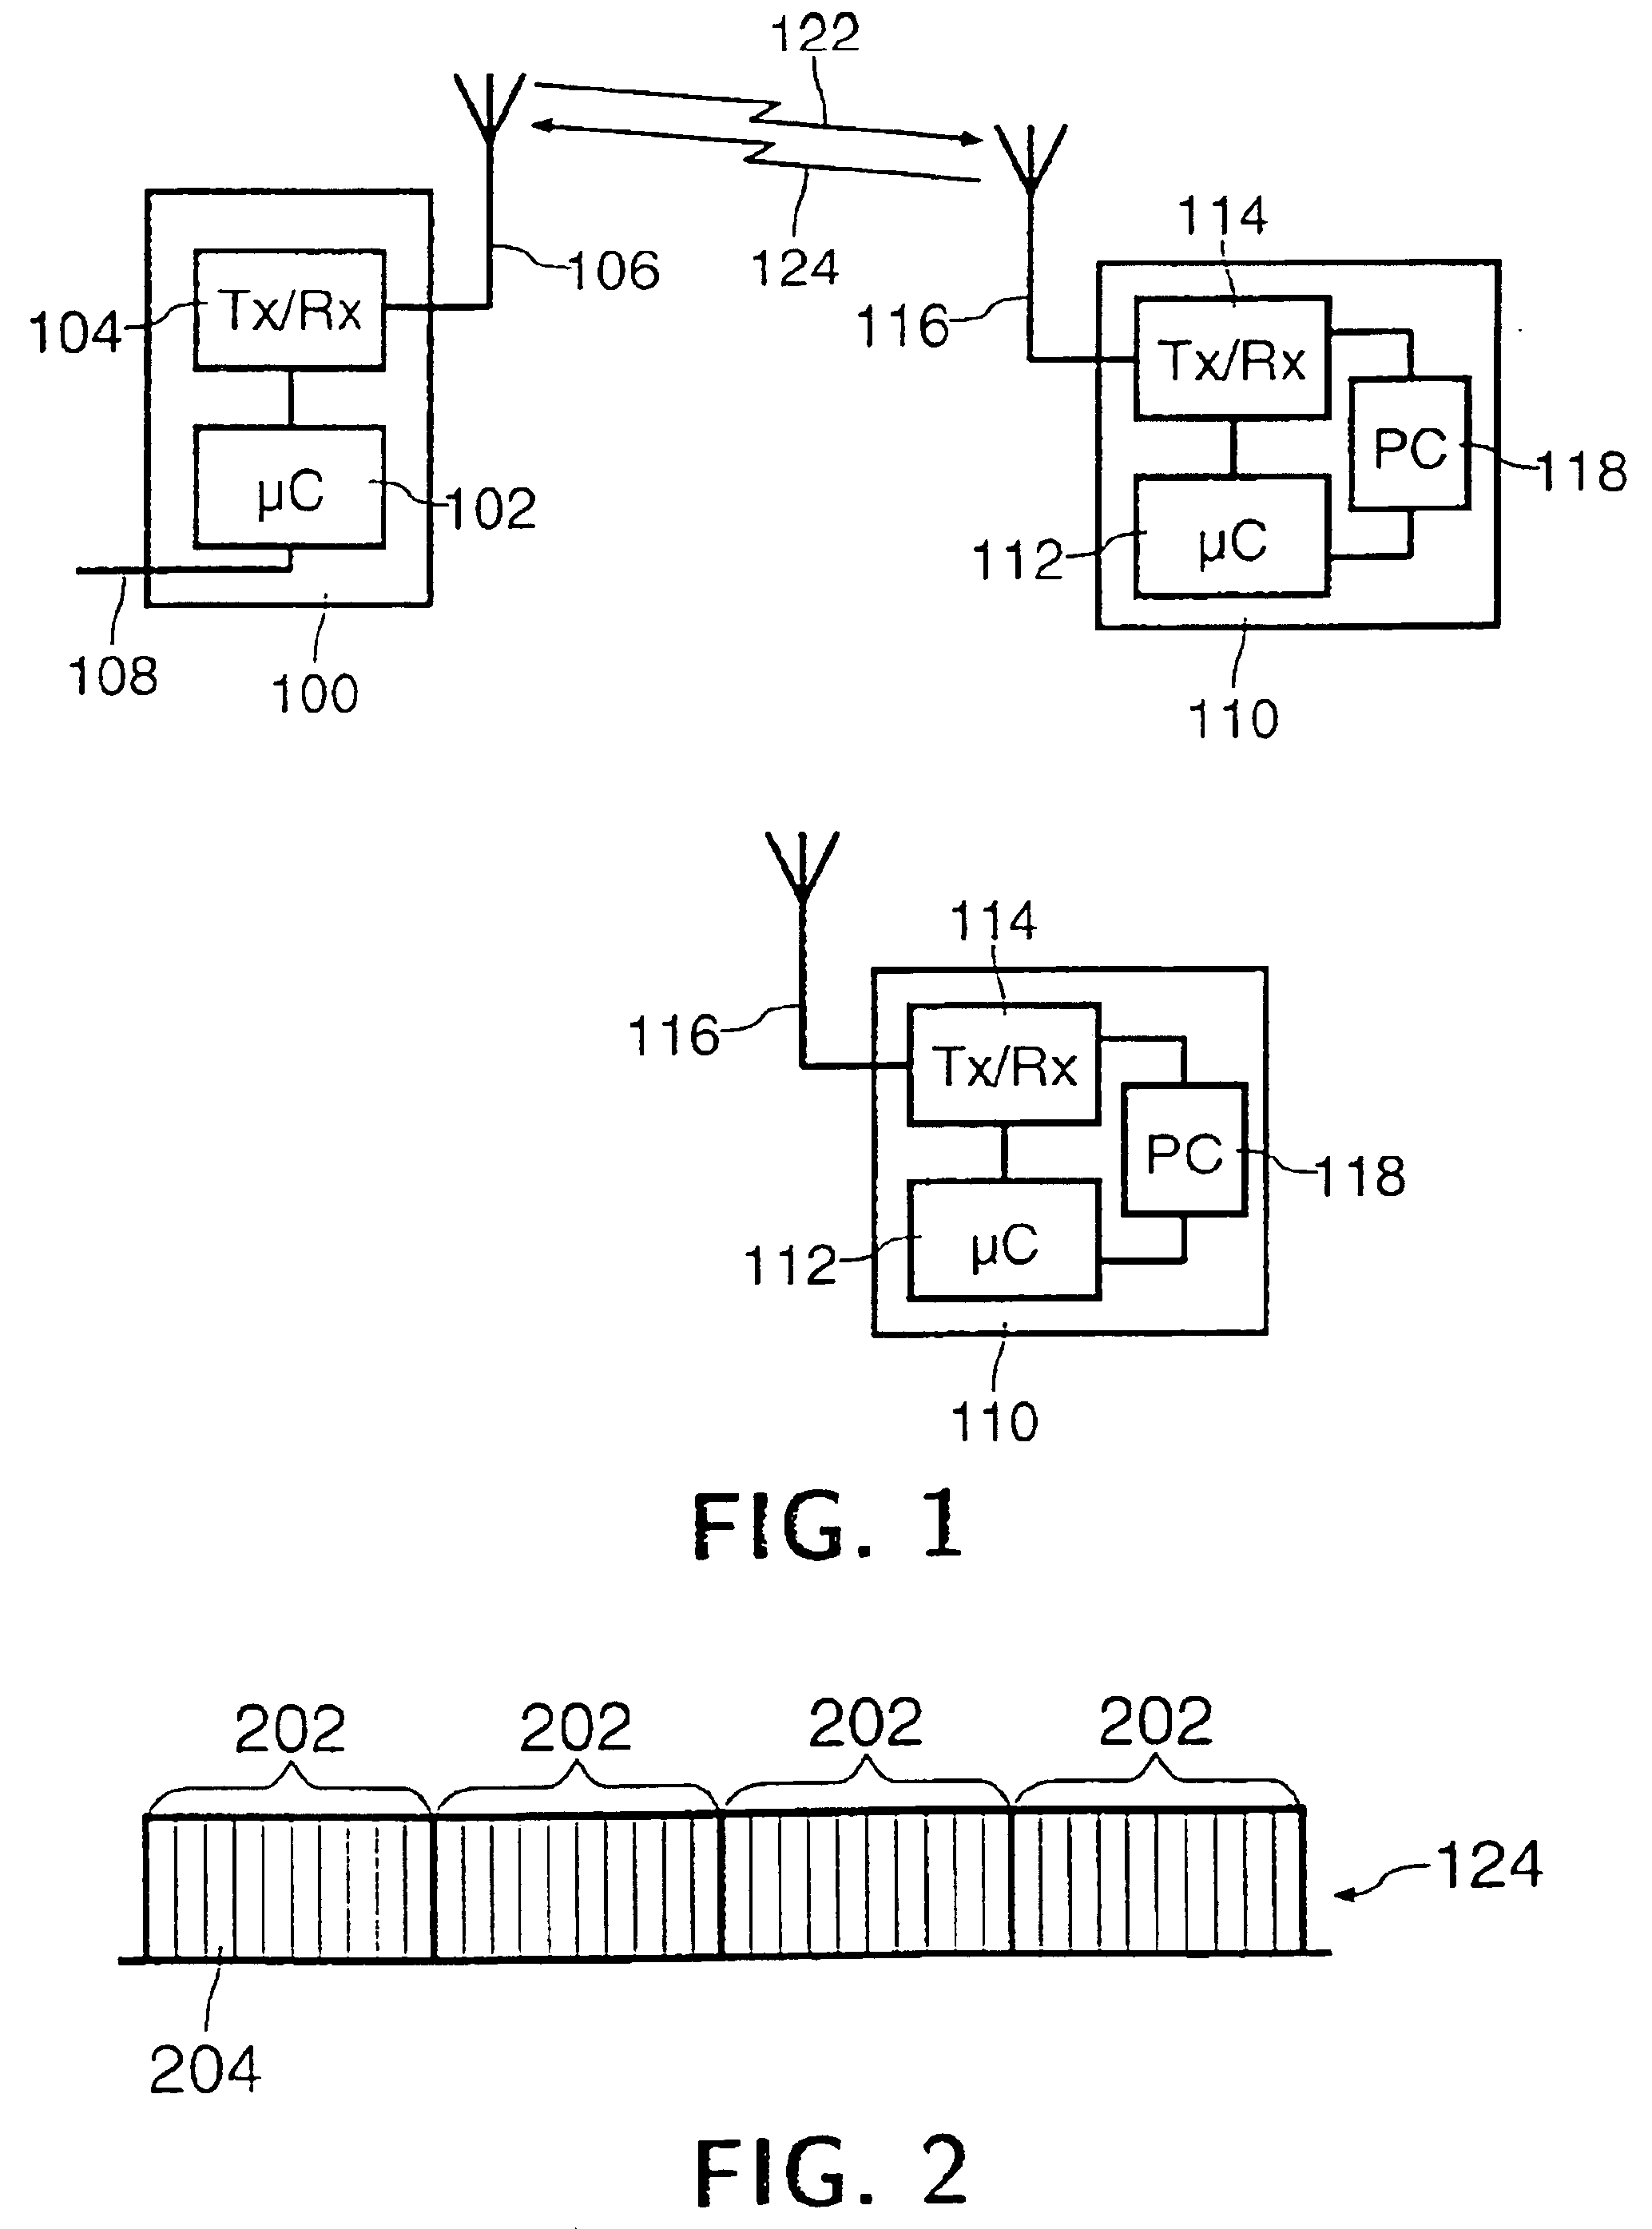 Radio communication system with request re-transmission until acknowledged